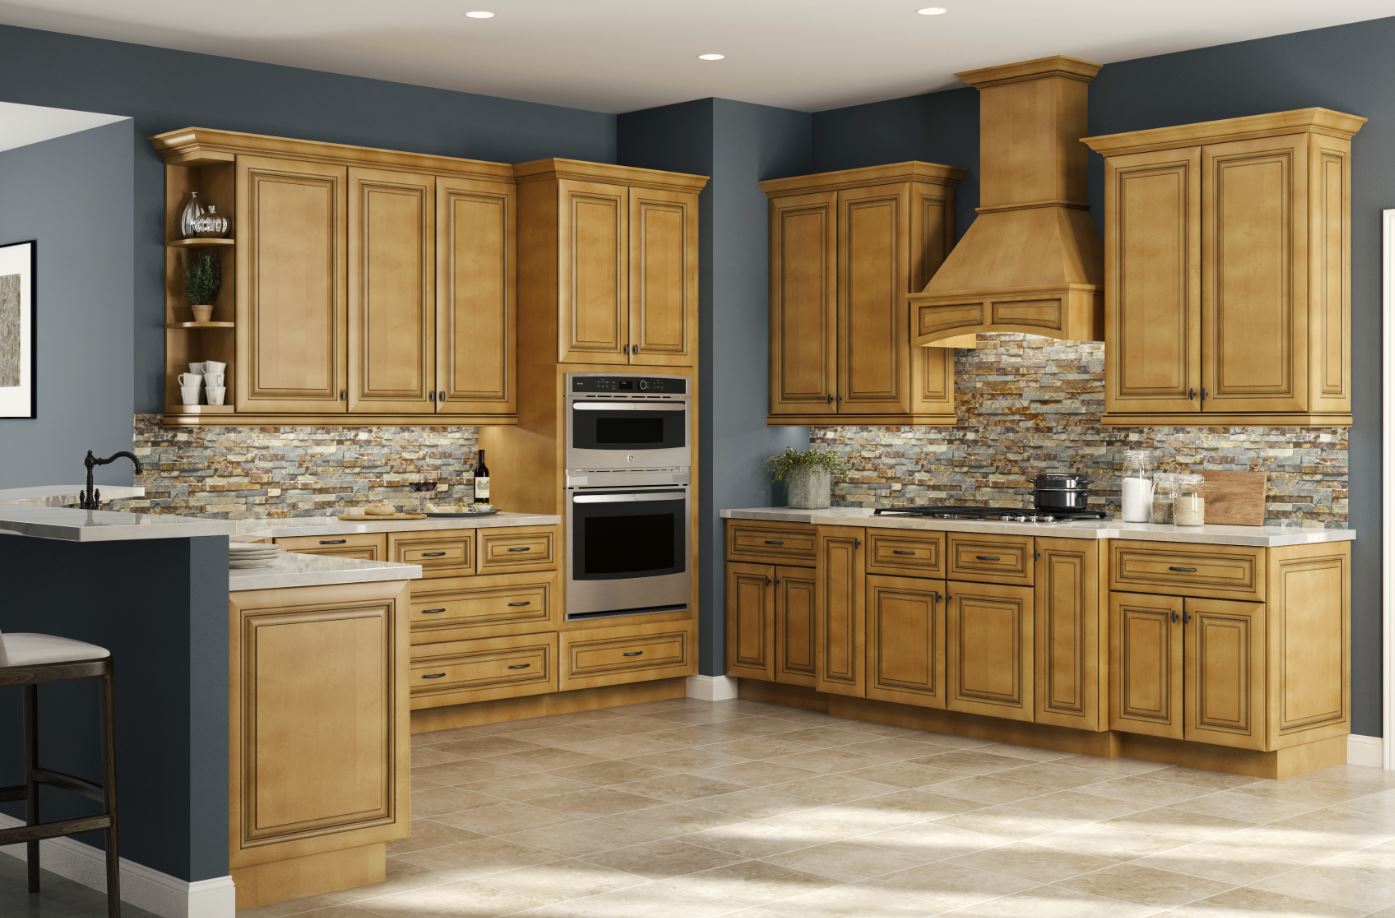 Lewiston Base Cabinets In Toffee Glaze Kitchen The Home Depot